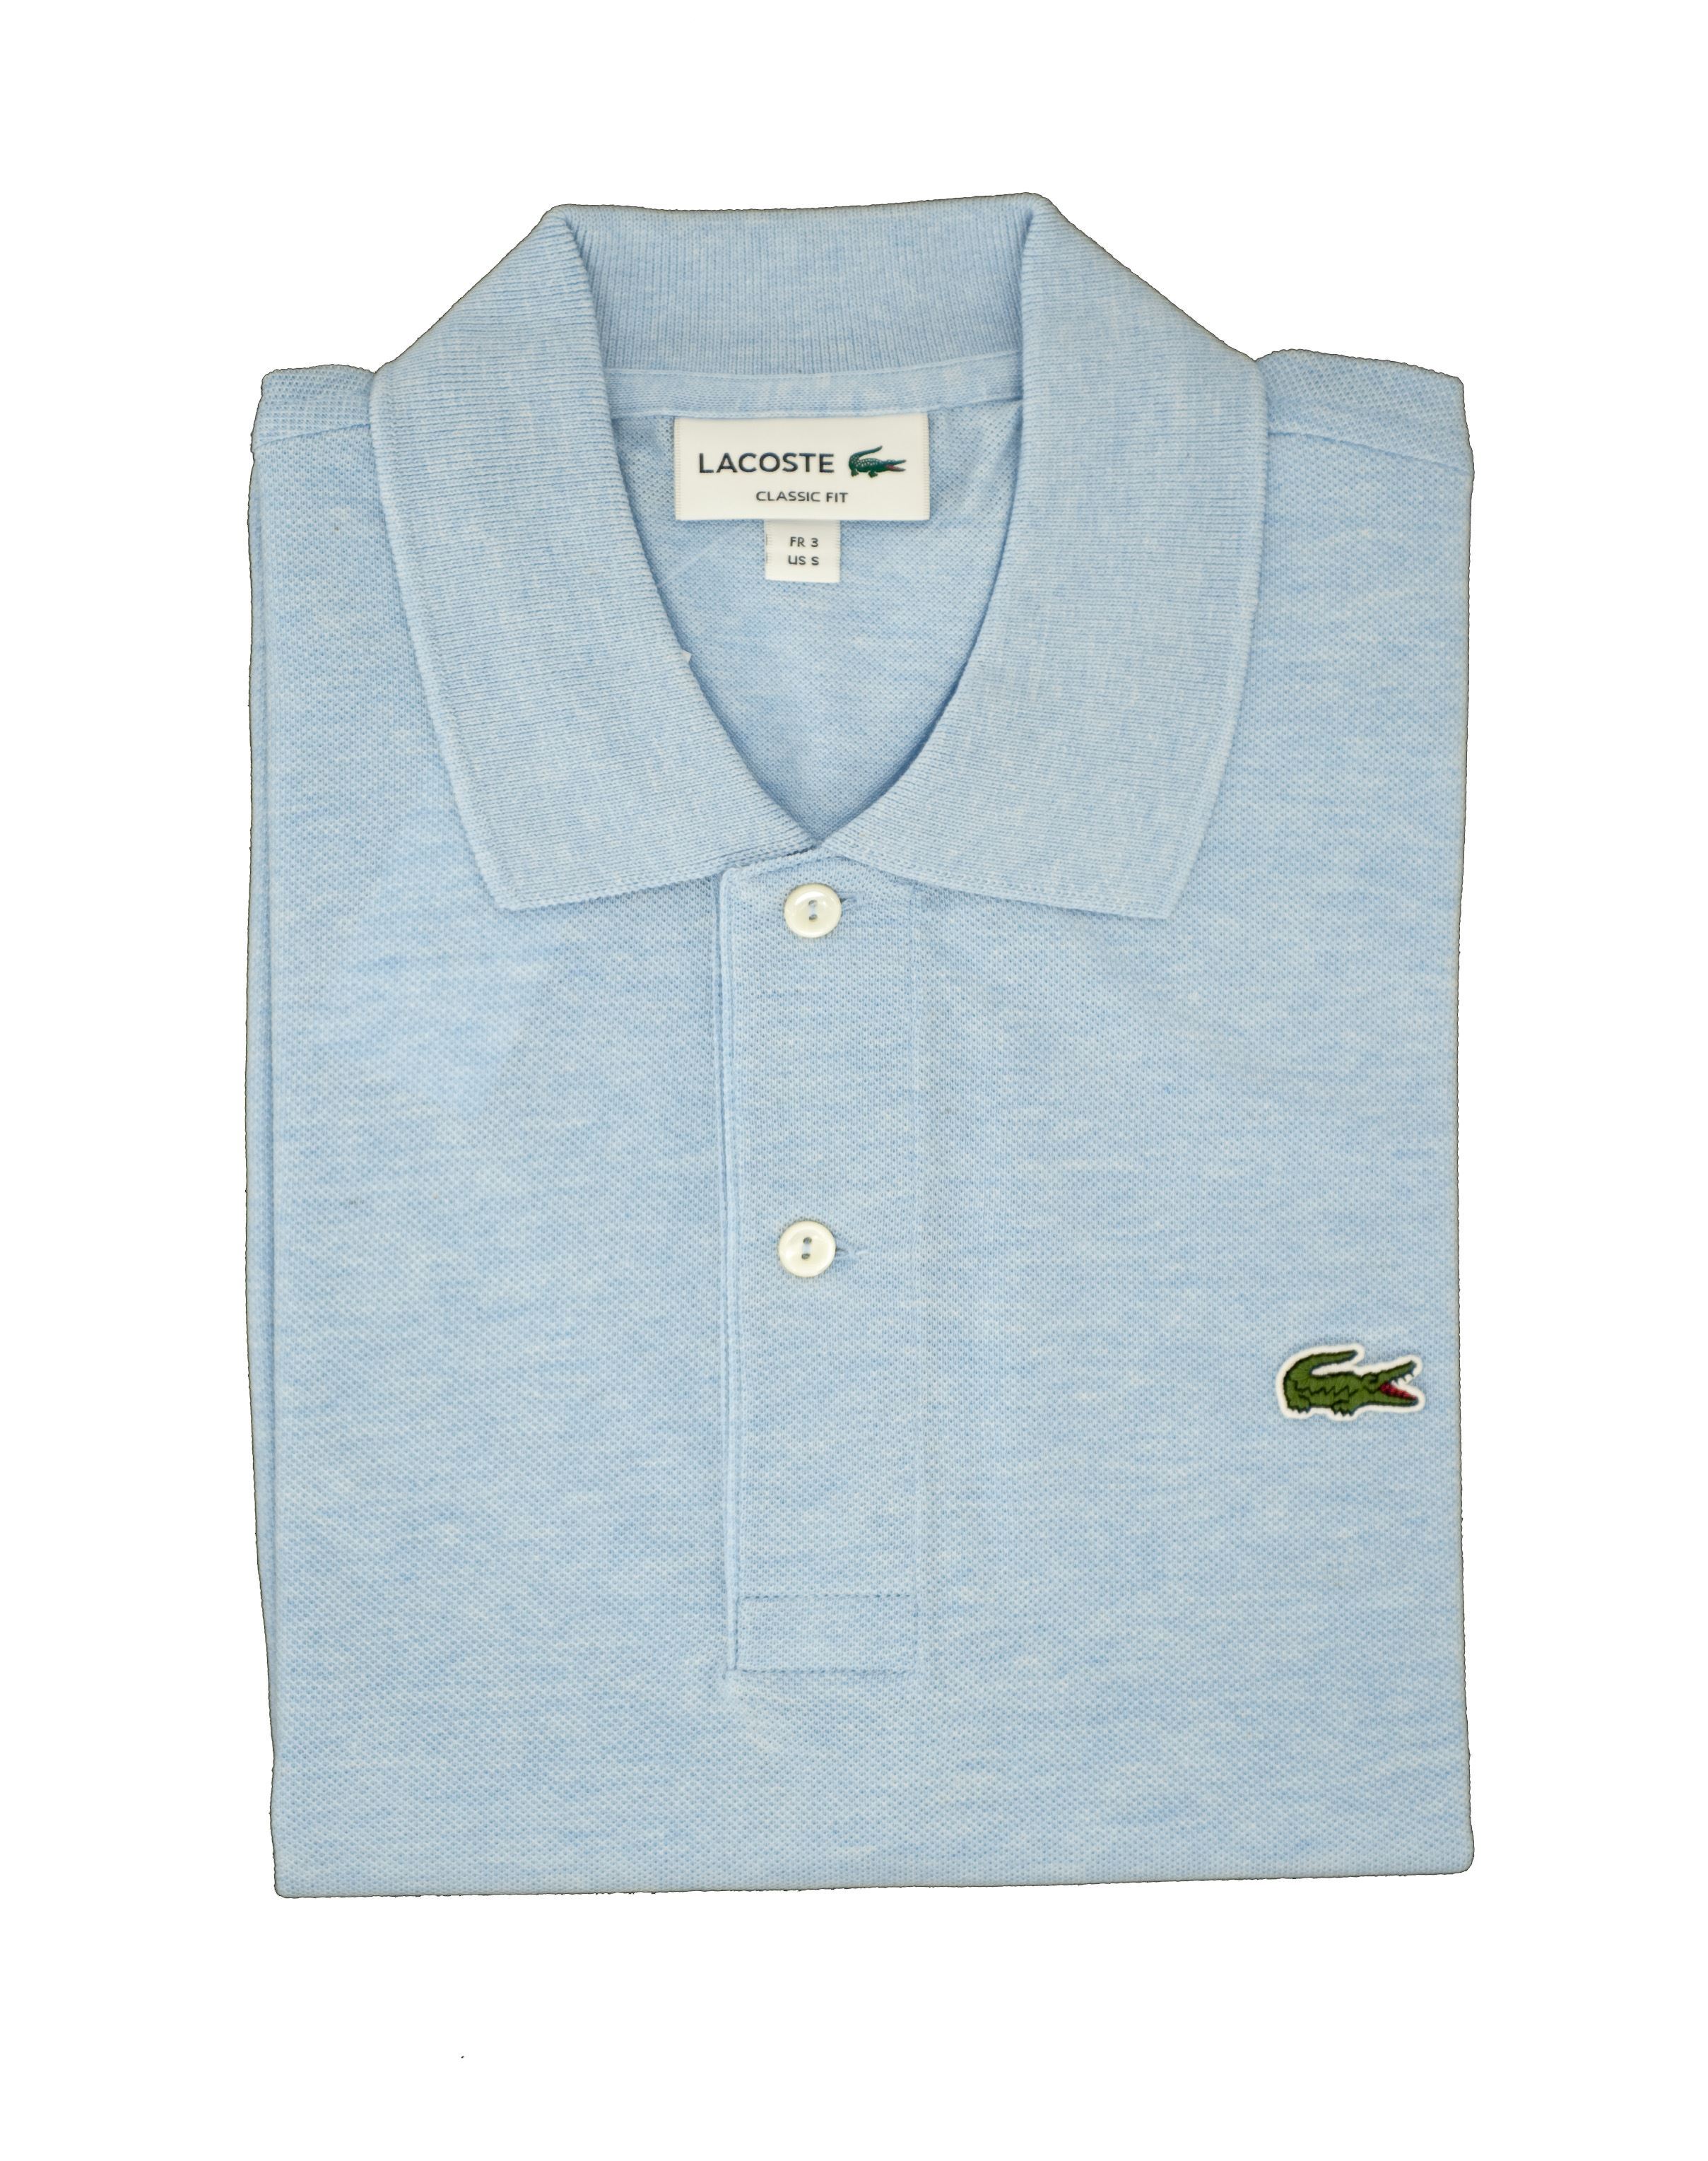 teal lacoste polo